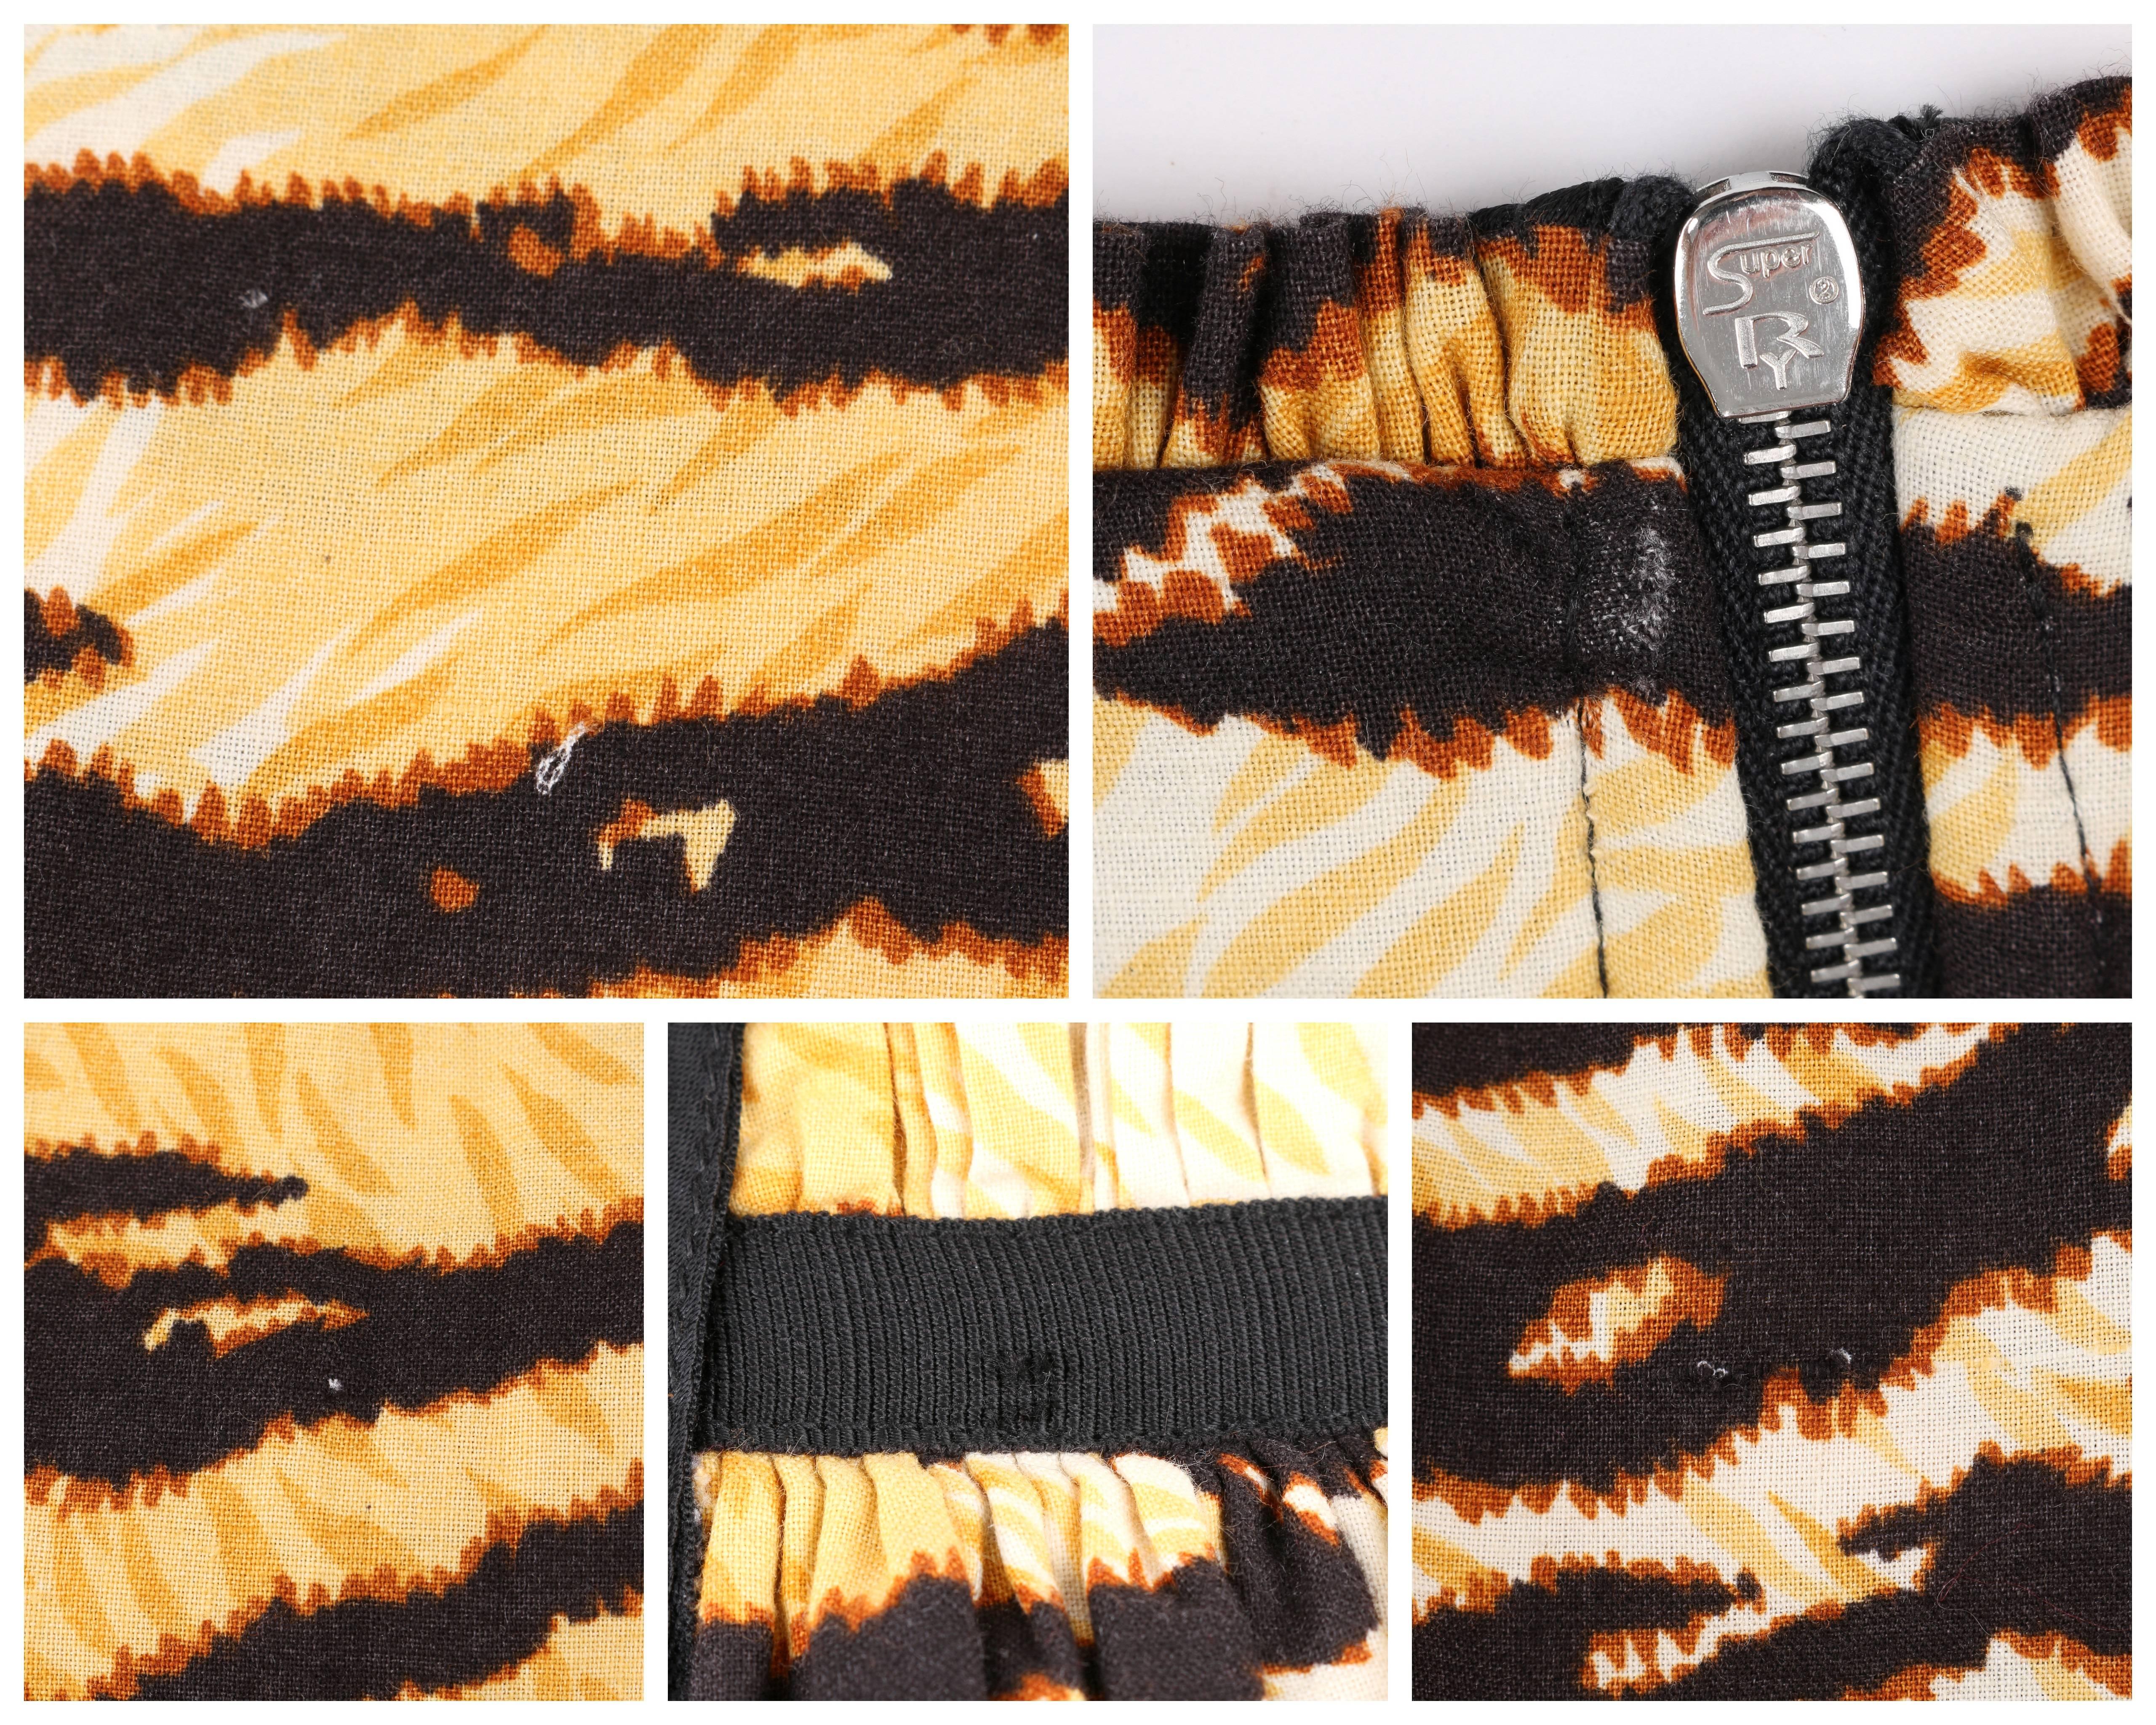 DOLCE & GABBANA Tiger Stripe Print Gathered Pleated Sleeveless Cocktail Dress In Good Condition For Sale In Thiensville, WI